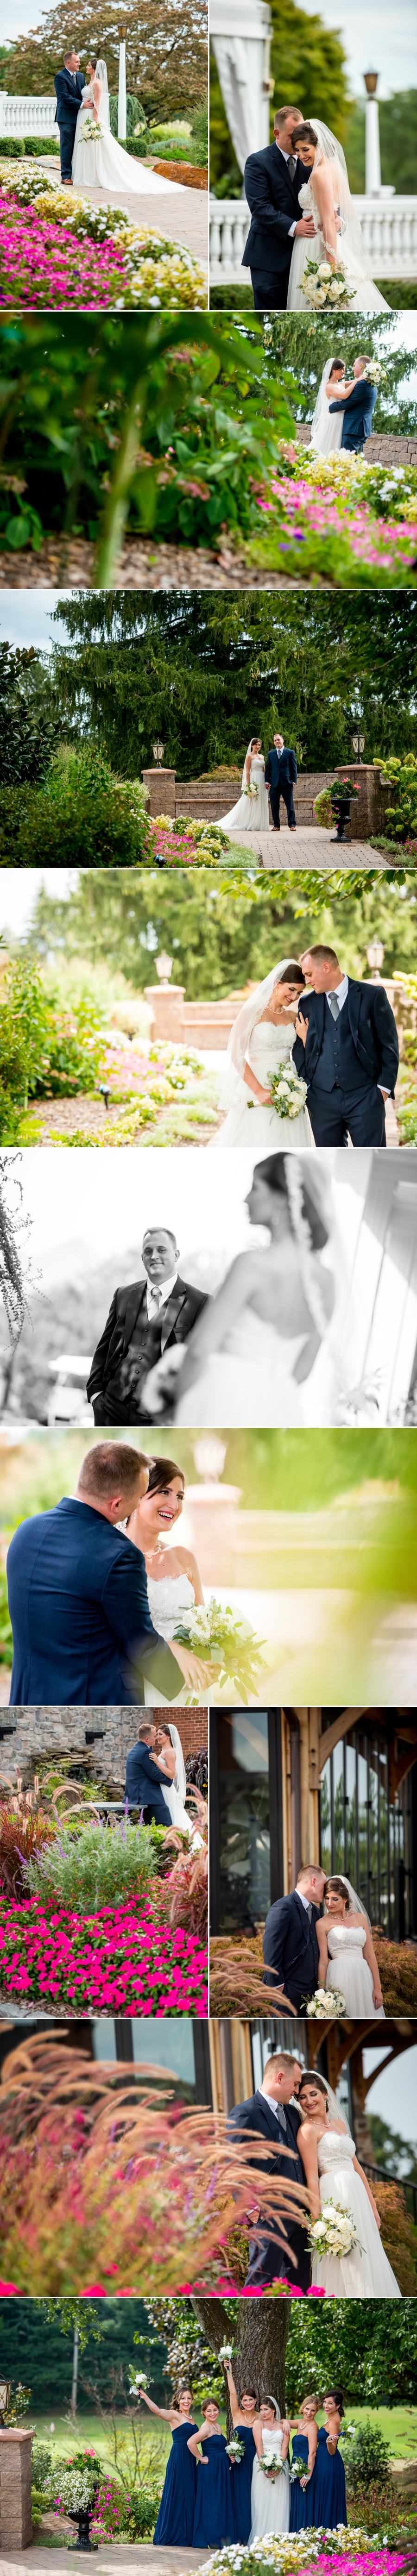 michelle-and-mike-wedding-blog-3